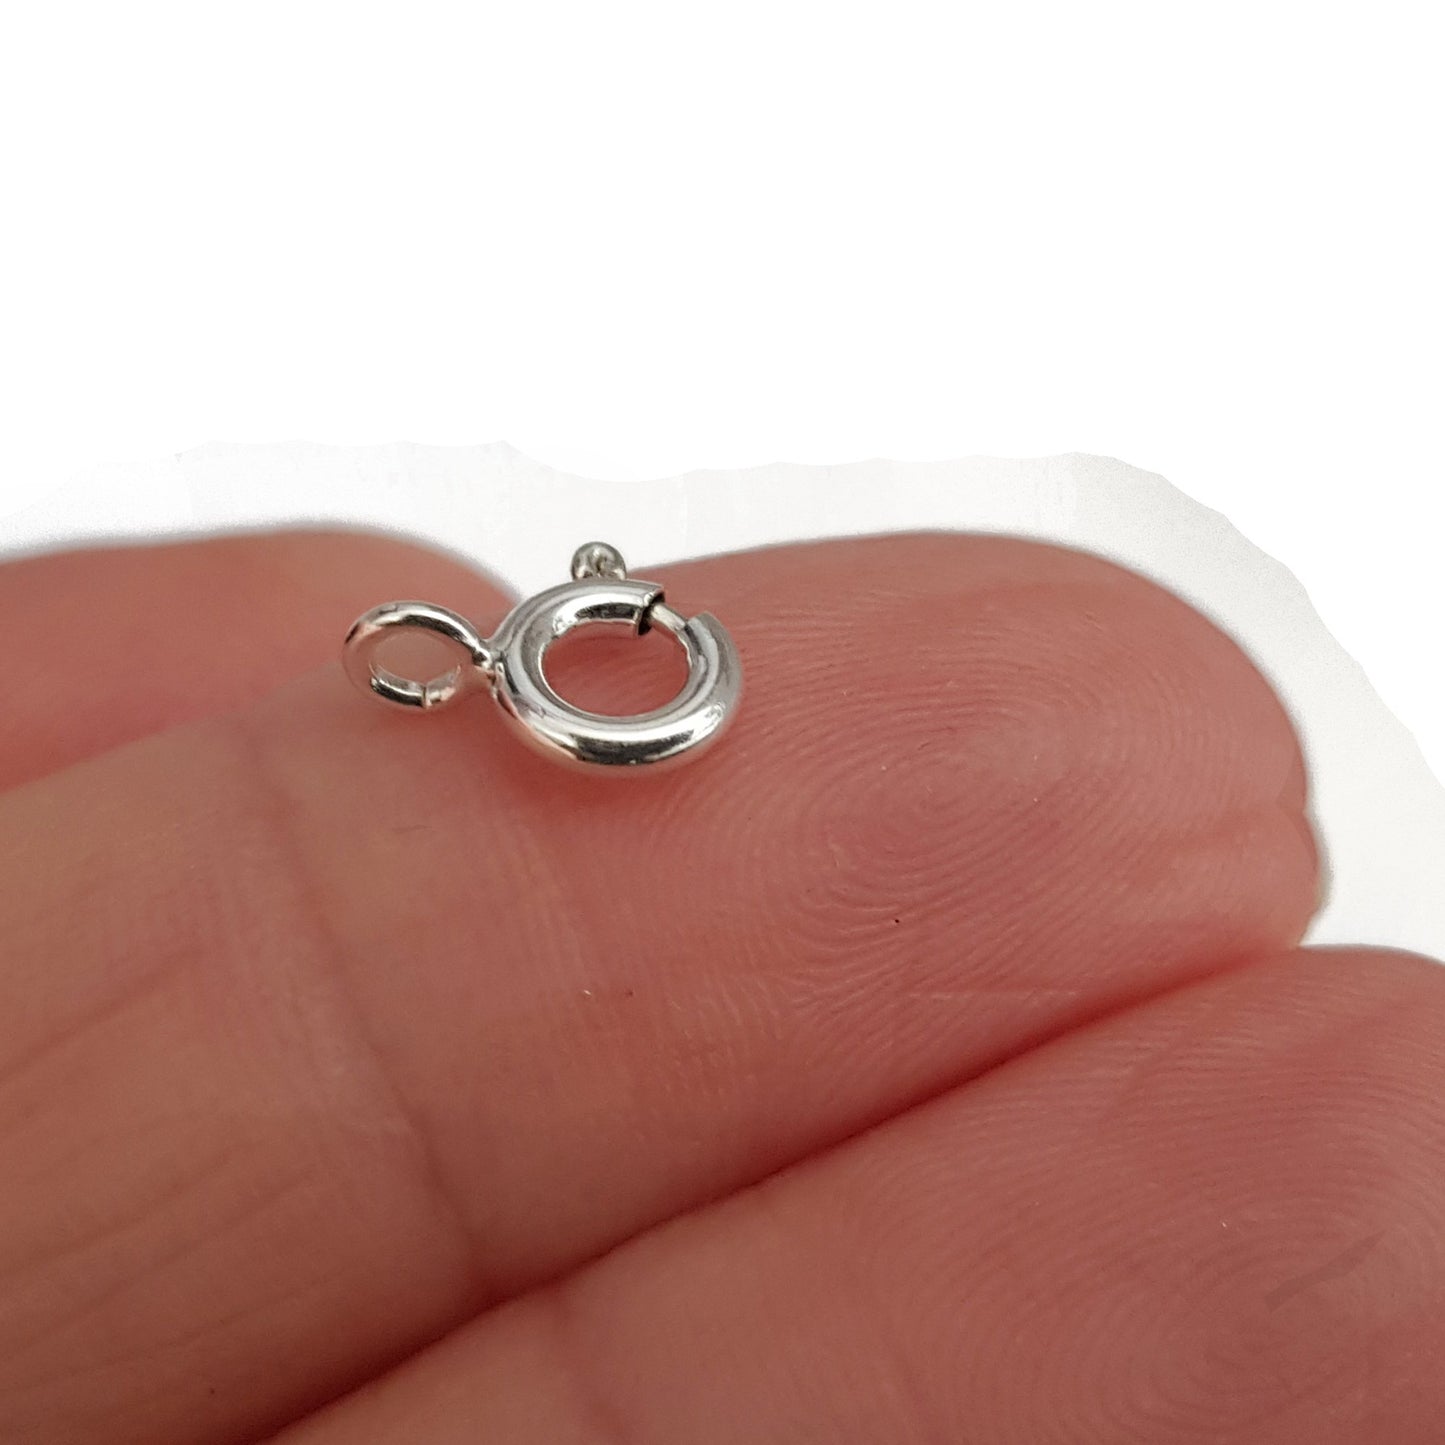 Bolt Ring Clasp 7mm Sterling Silver 3pcs | SS-022BR7 | Jewellery Supply - Kalitheo Jewellery